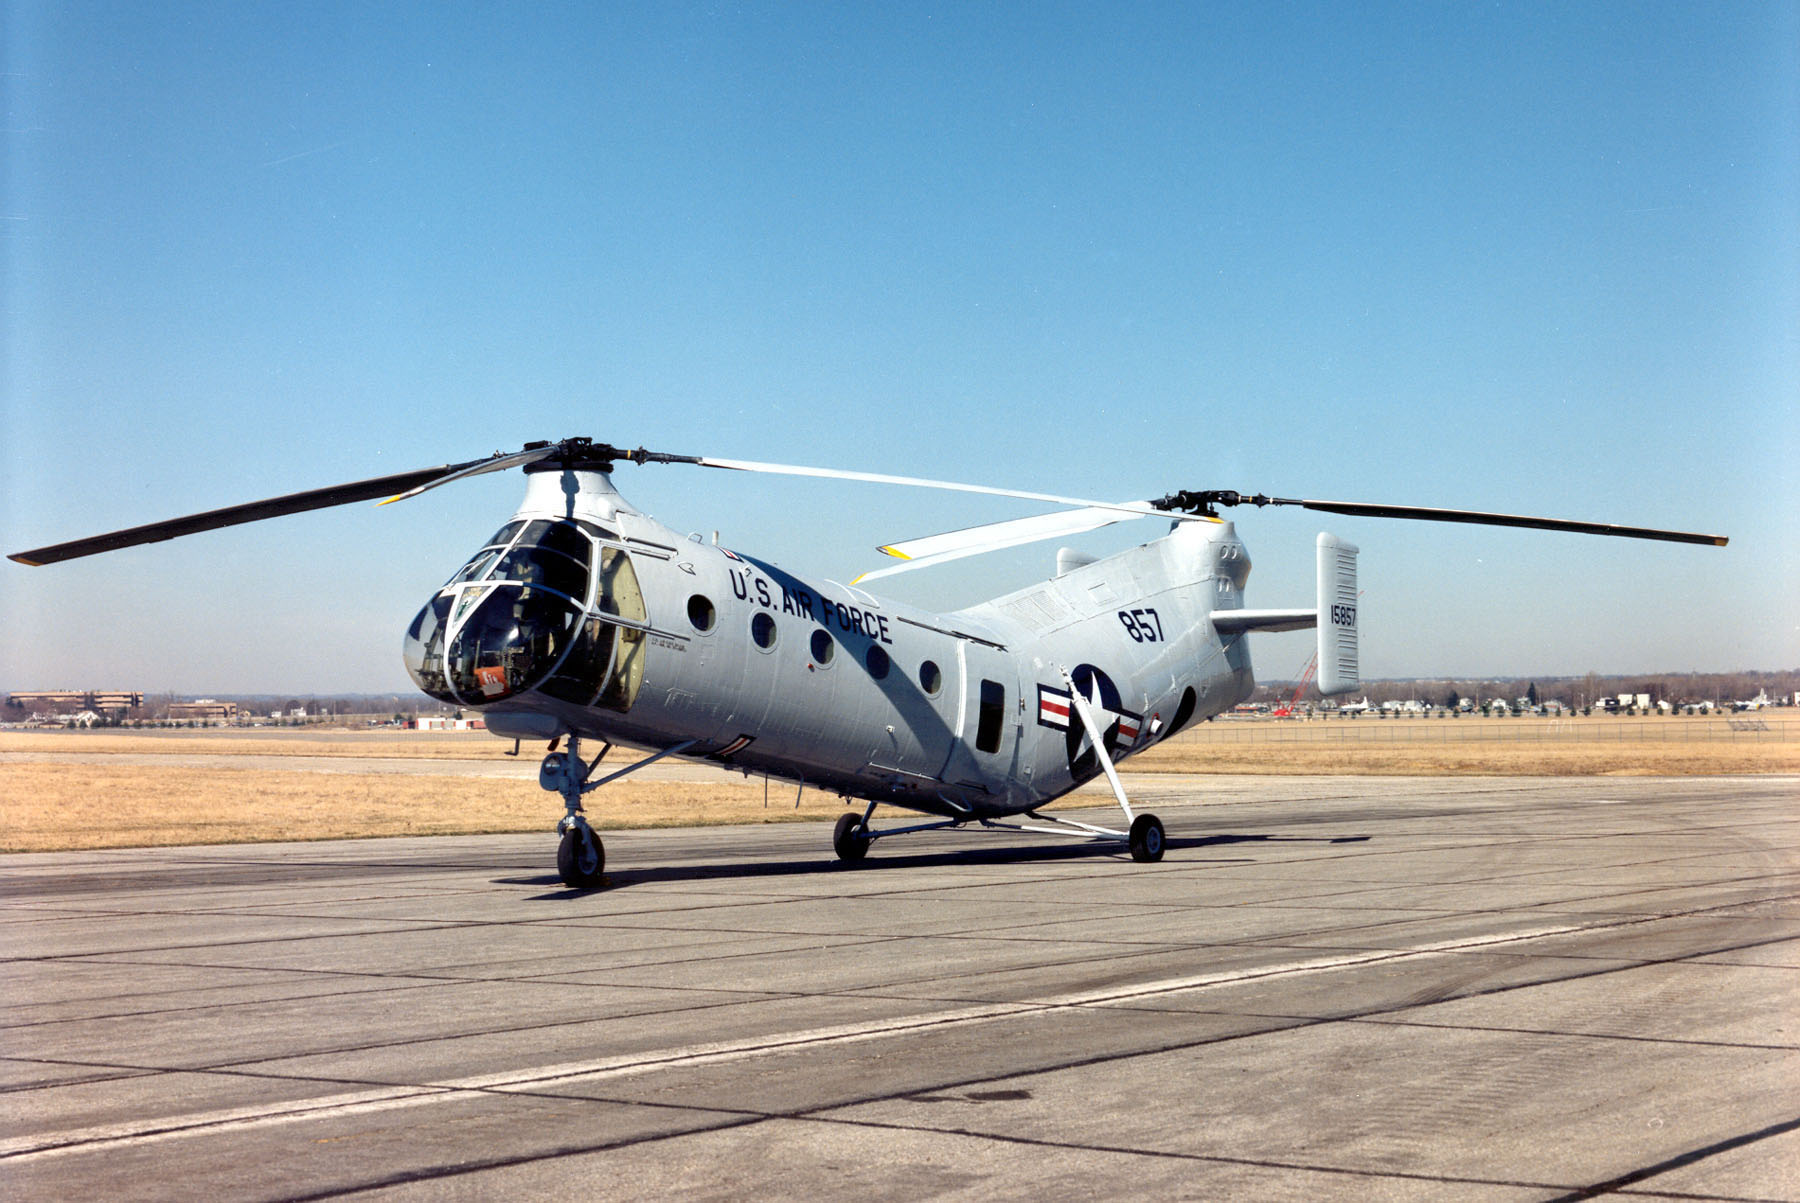 Piasecki CH-21B Workhorse, 51-15857, at the National Museum of the United States Air Force. (U.S. Air Force)